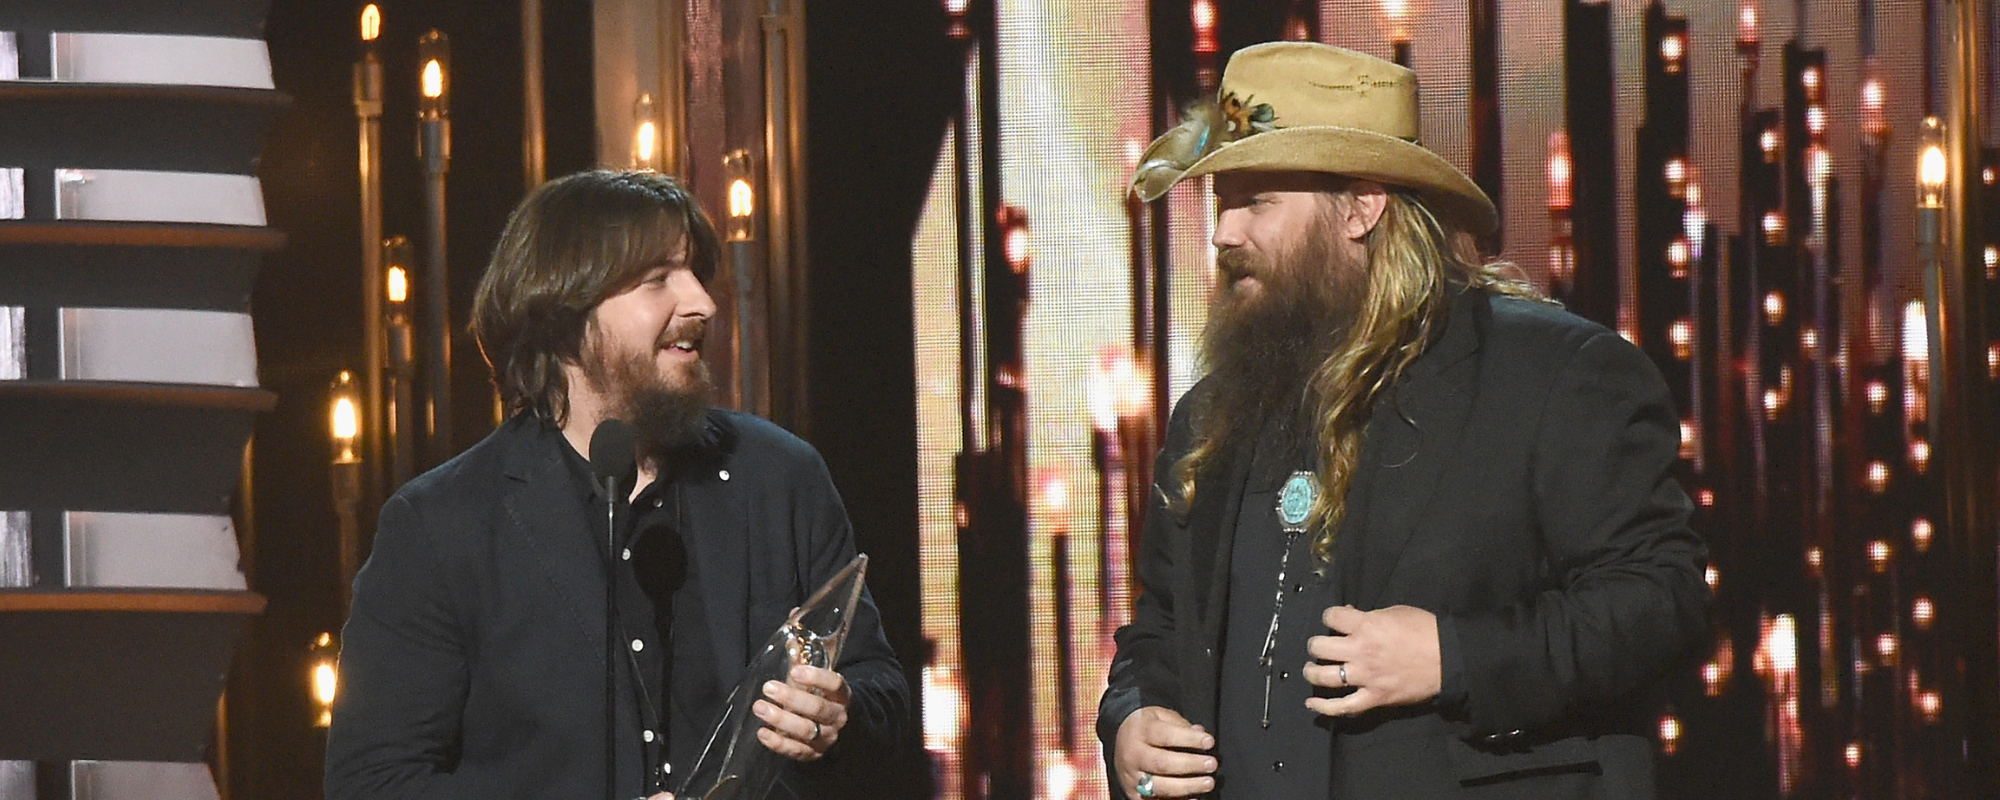 The Top 5 Moments That Shaped Chris Stapleton’s Career